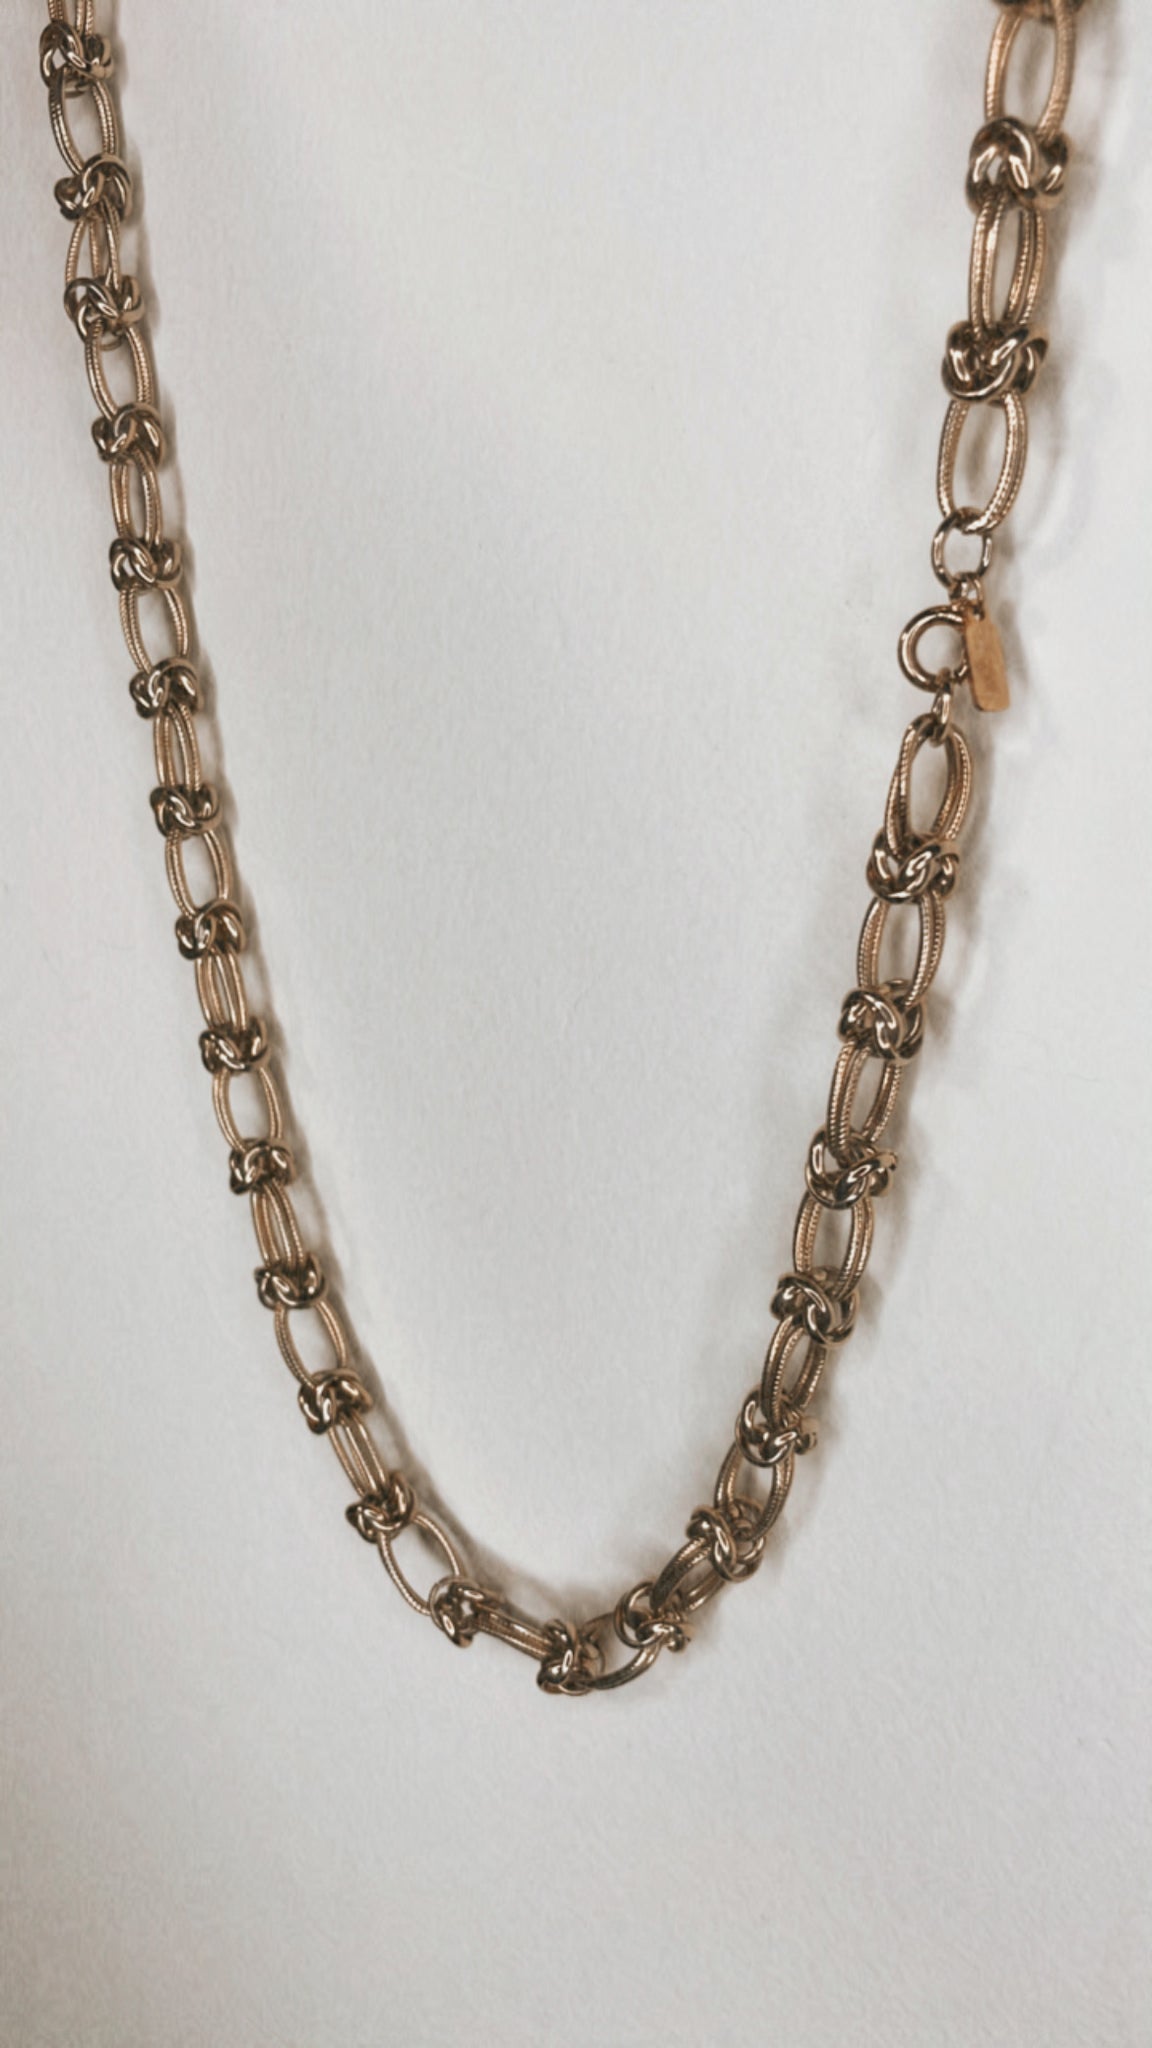 Gold Toned Barbed Wire Necklace